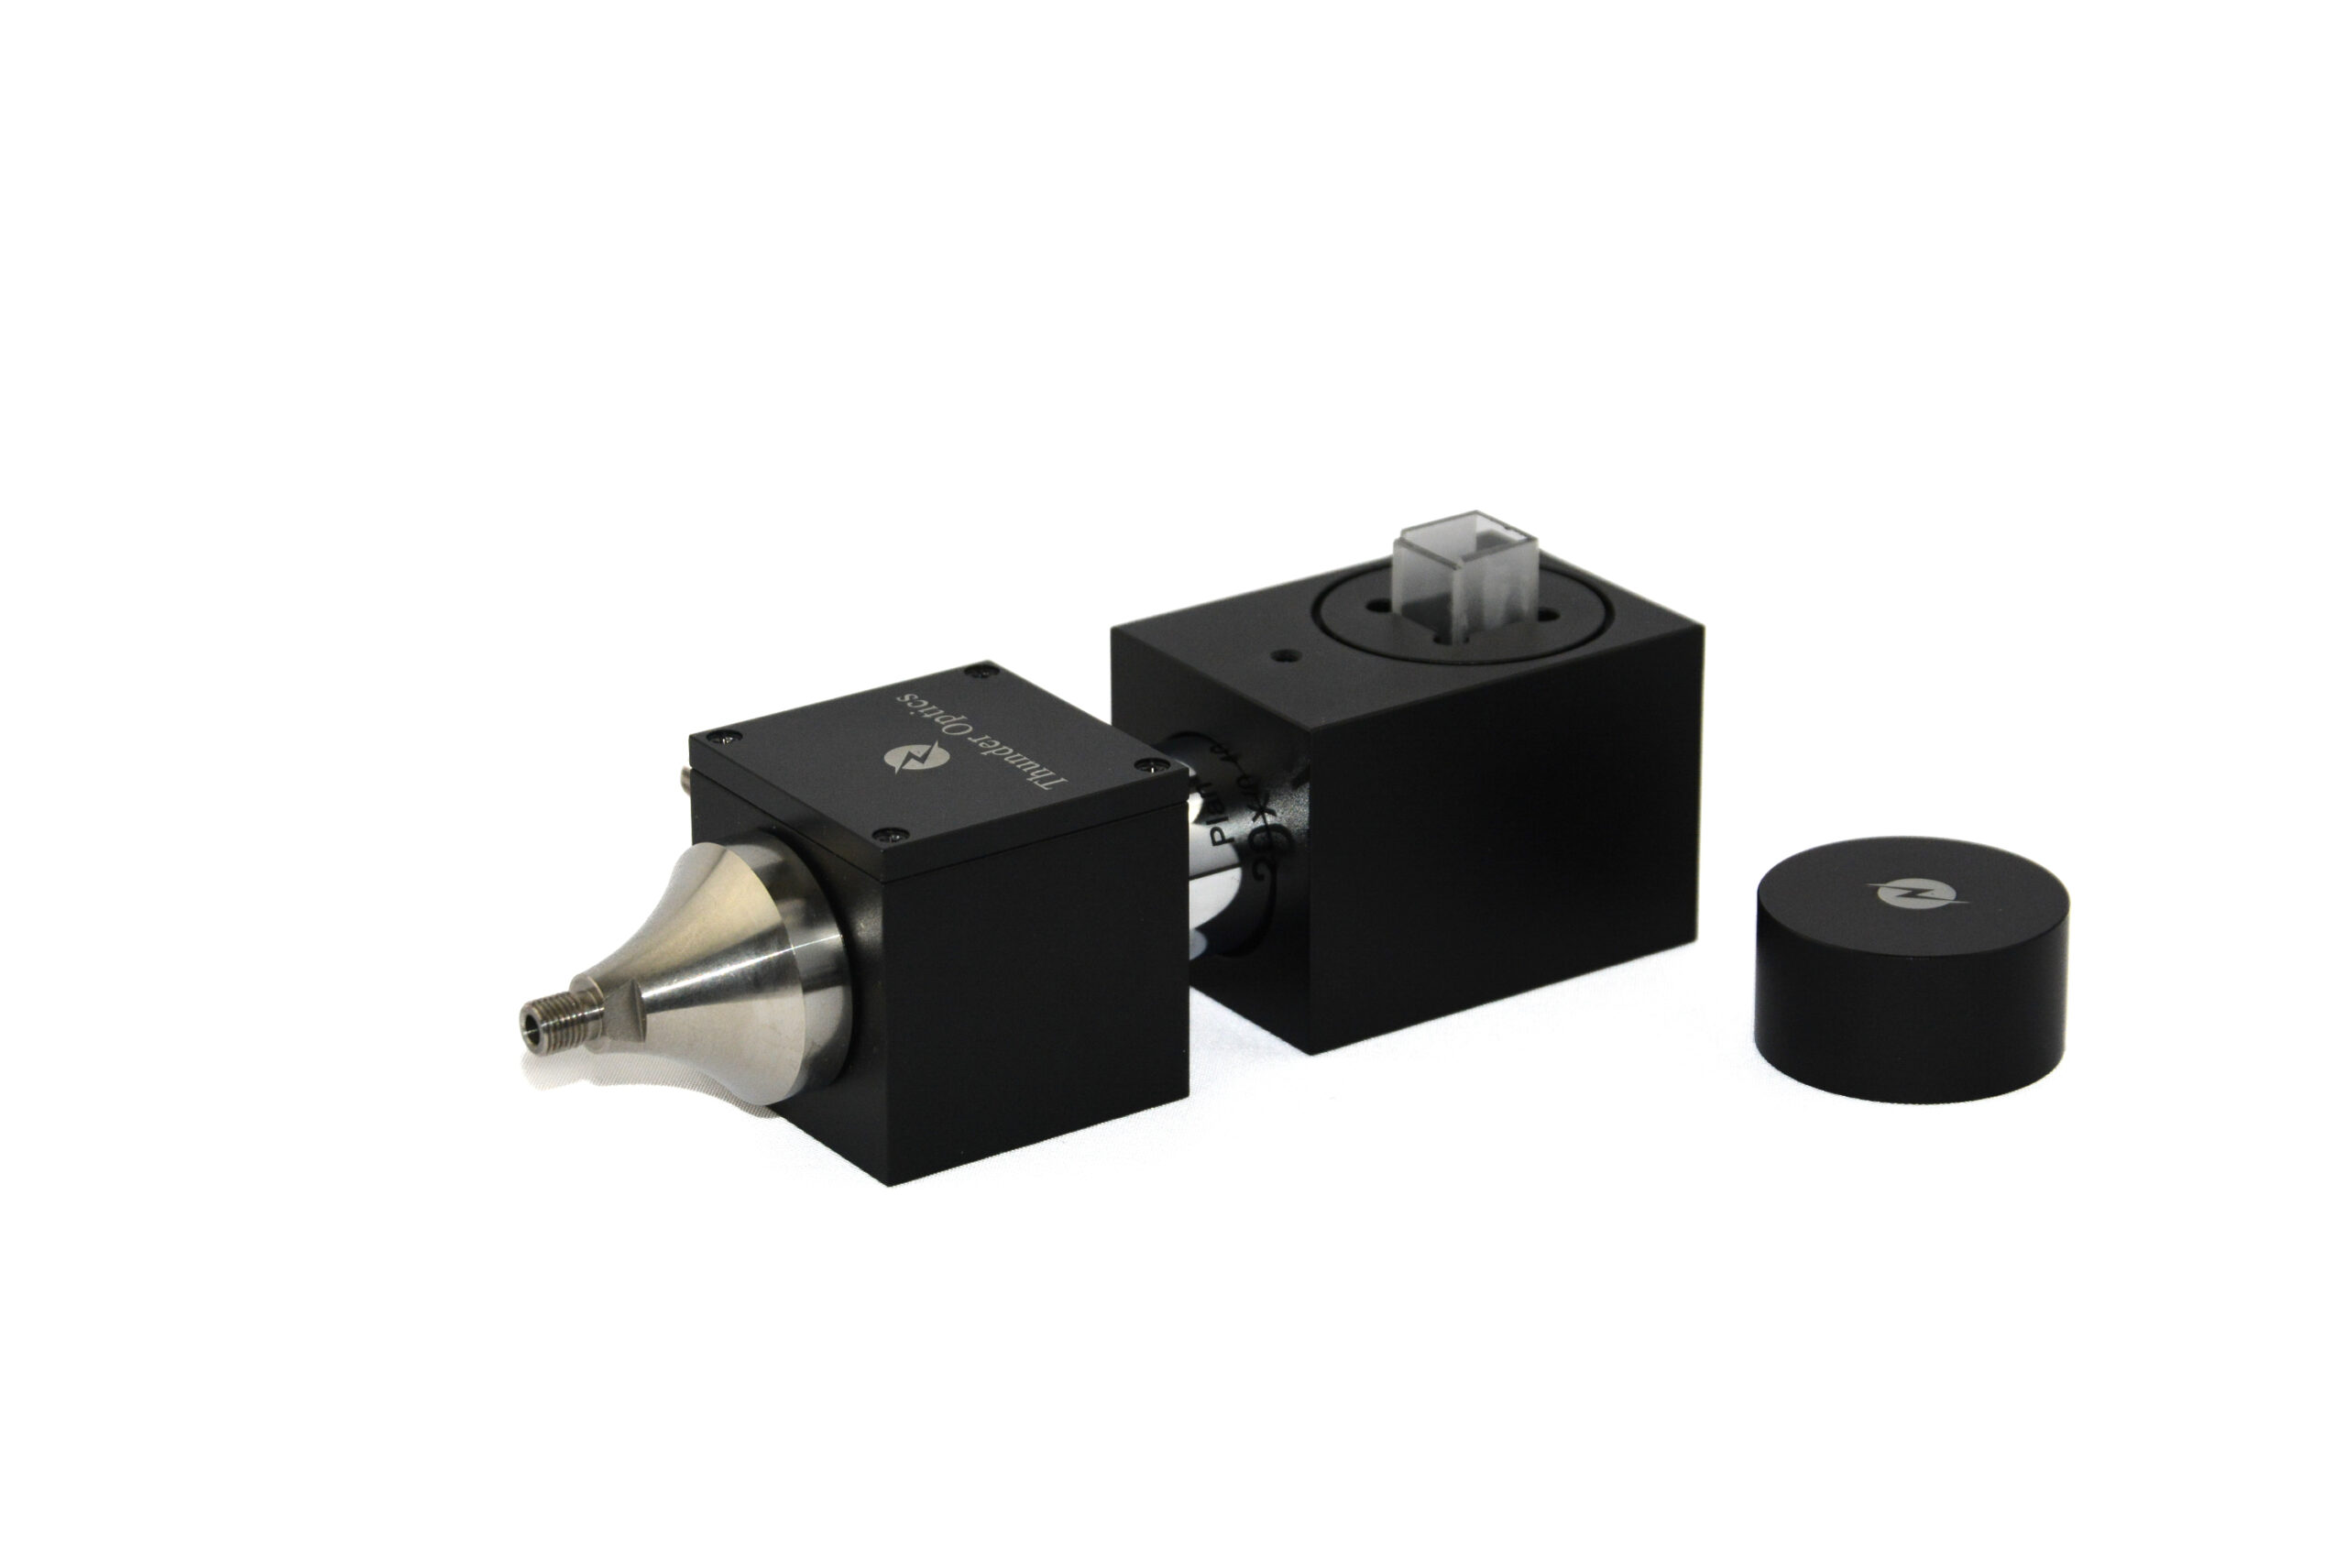 Raman Cuvette Holder is connected with a Thunder Optics Raman Probe